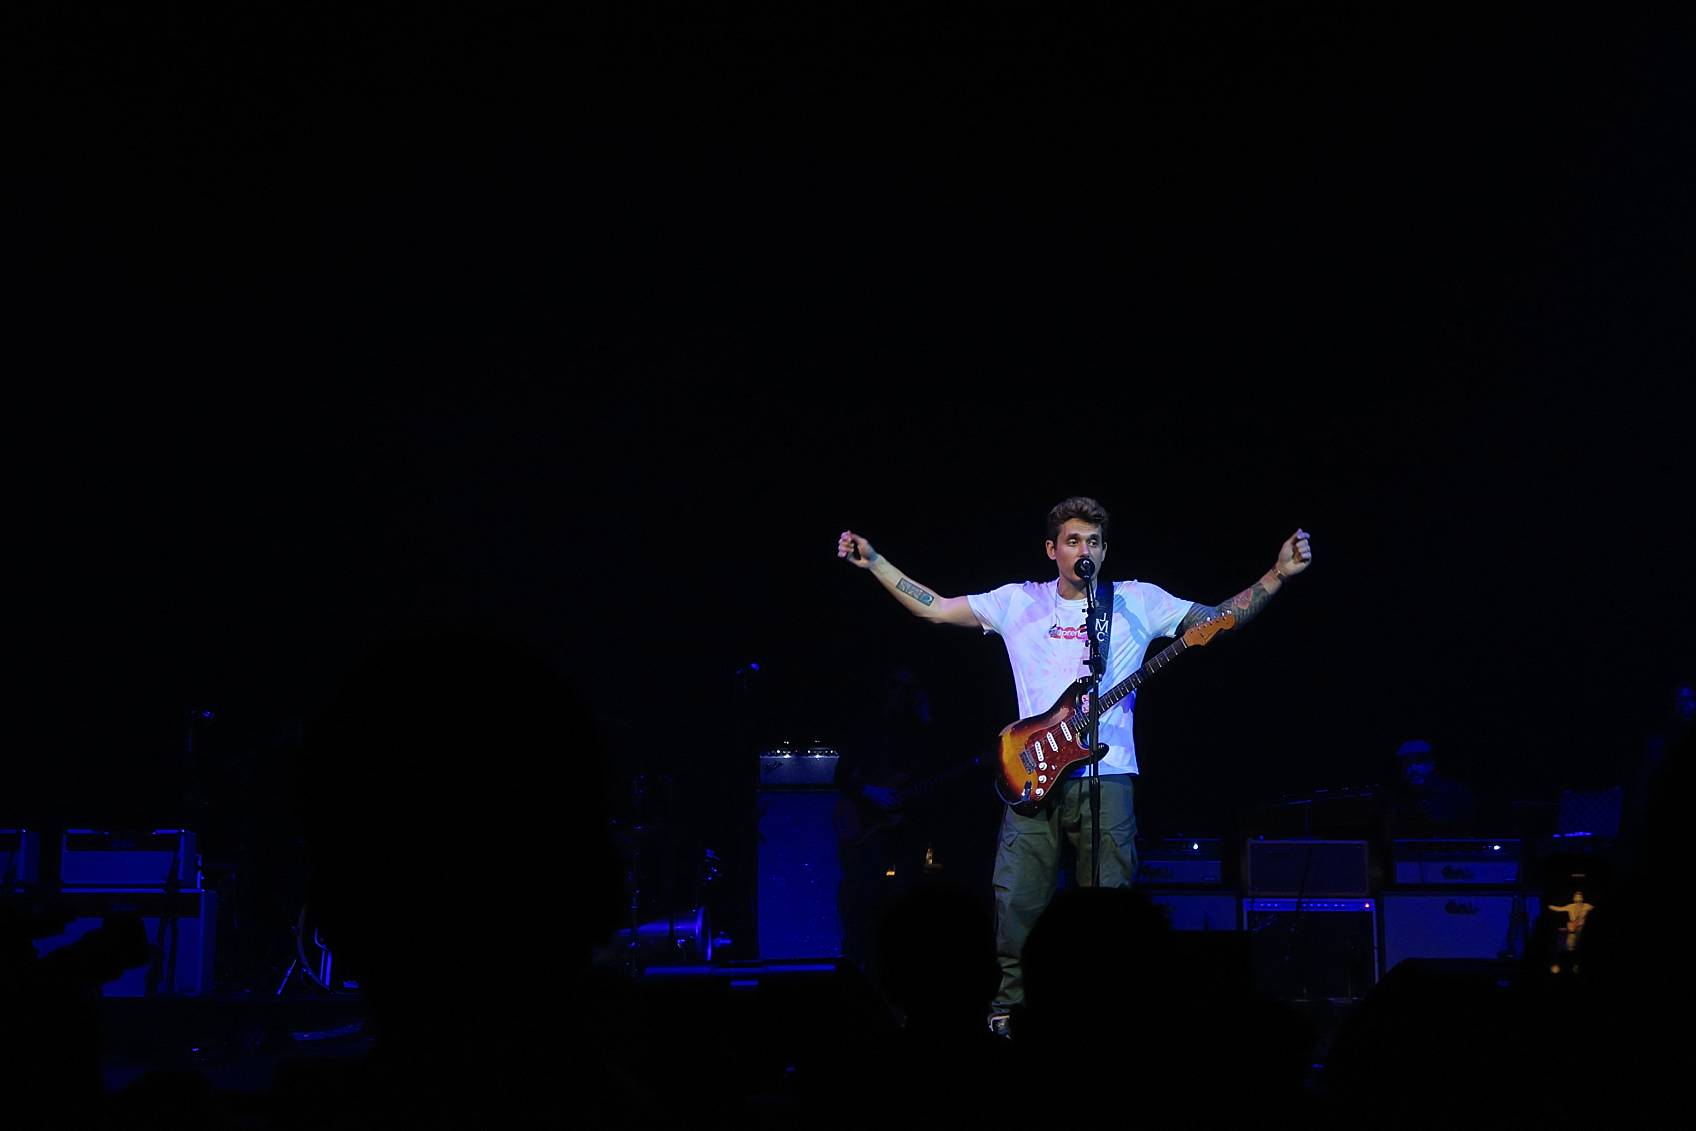 John Mayer performing in Phoenix on stage for his The Search for Everything Tour black background his hands are up talking about the universe and his hit songs